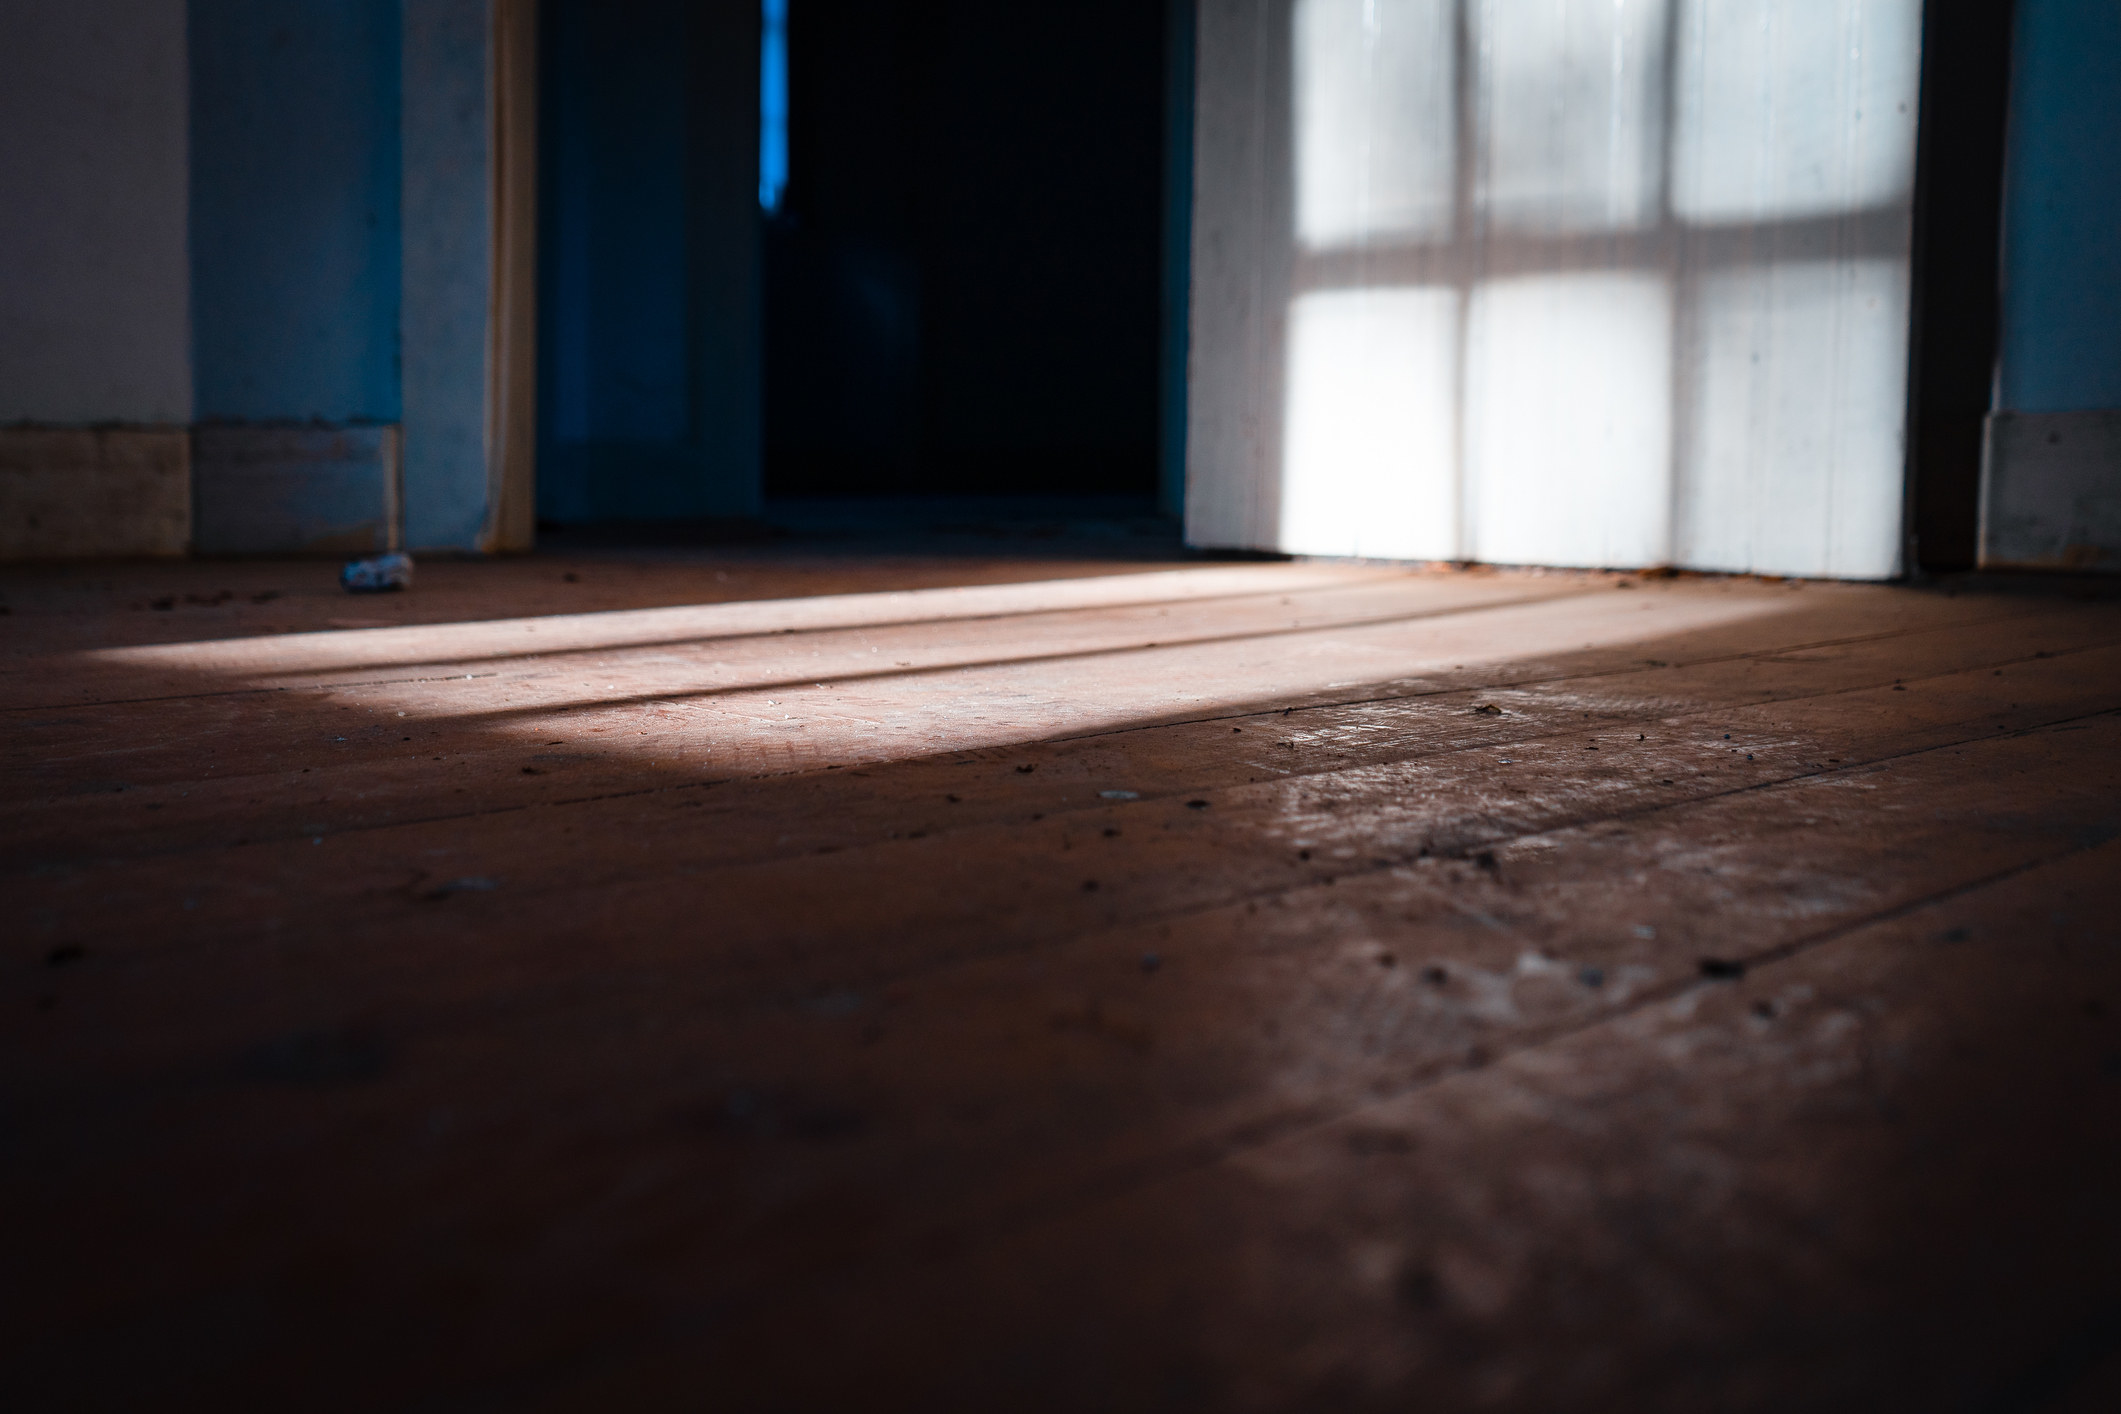 The hardwood floors of an old building